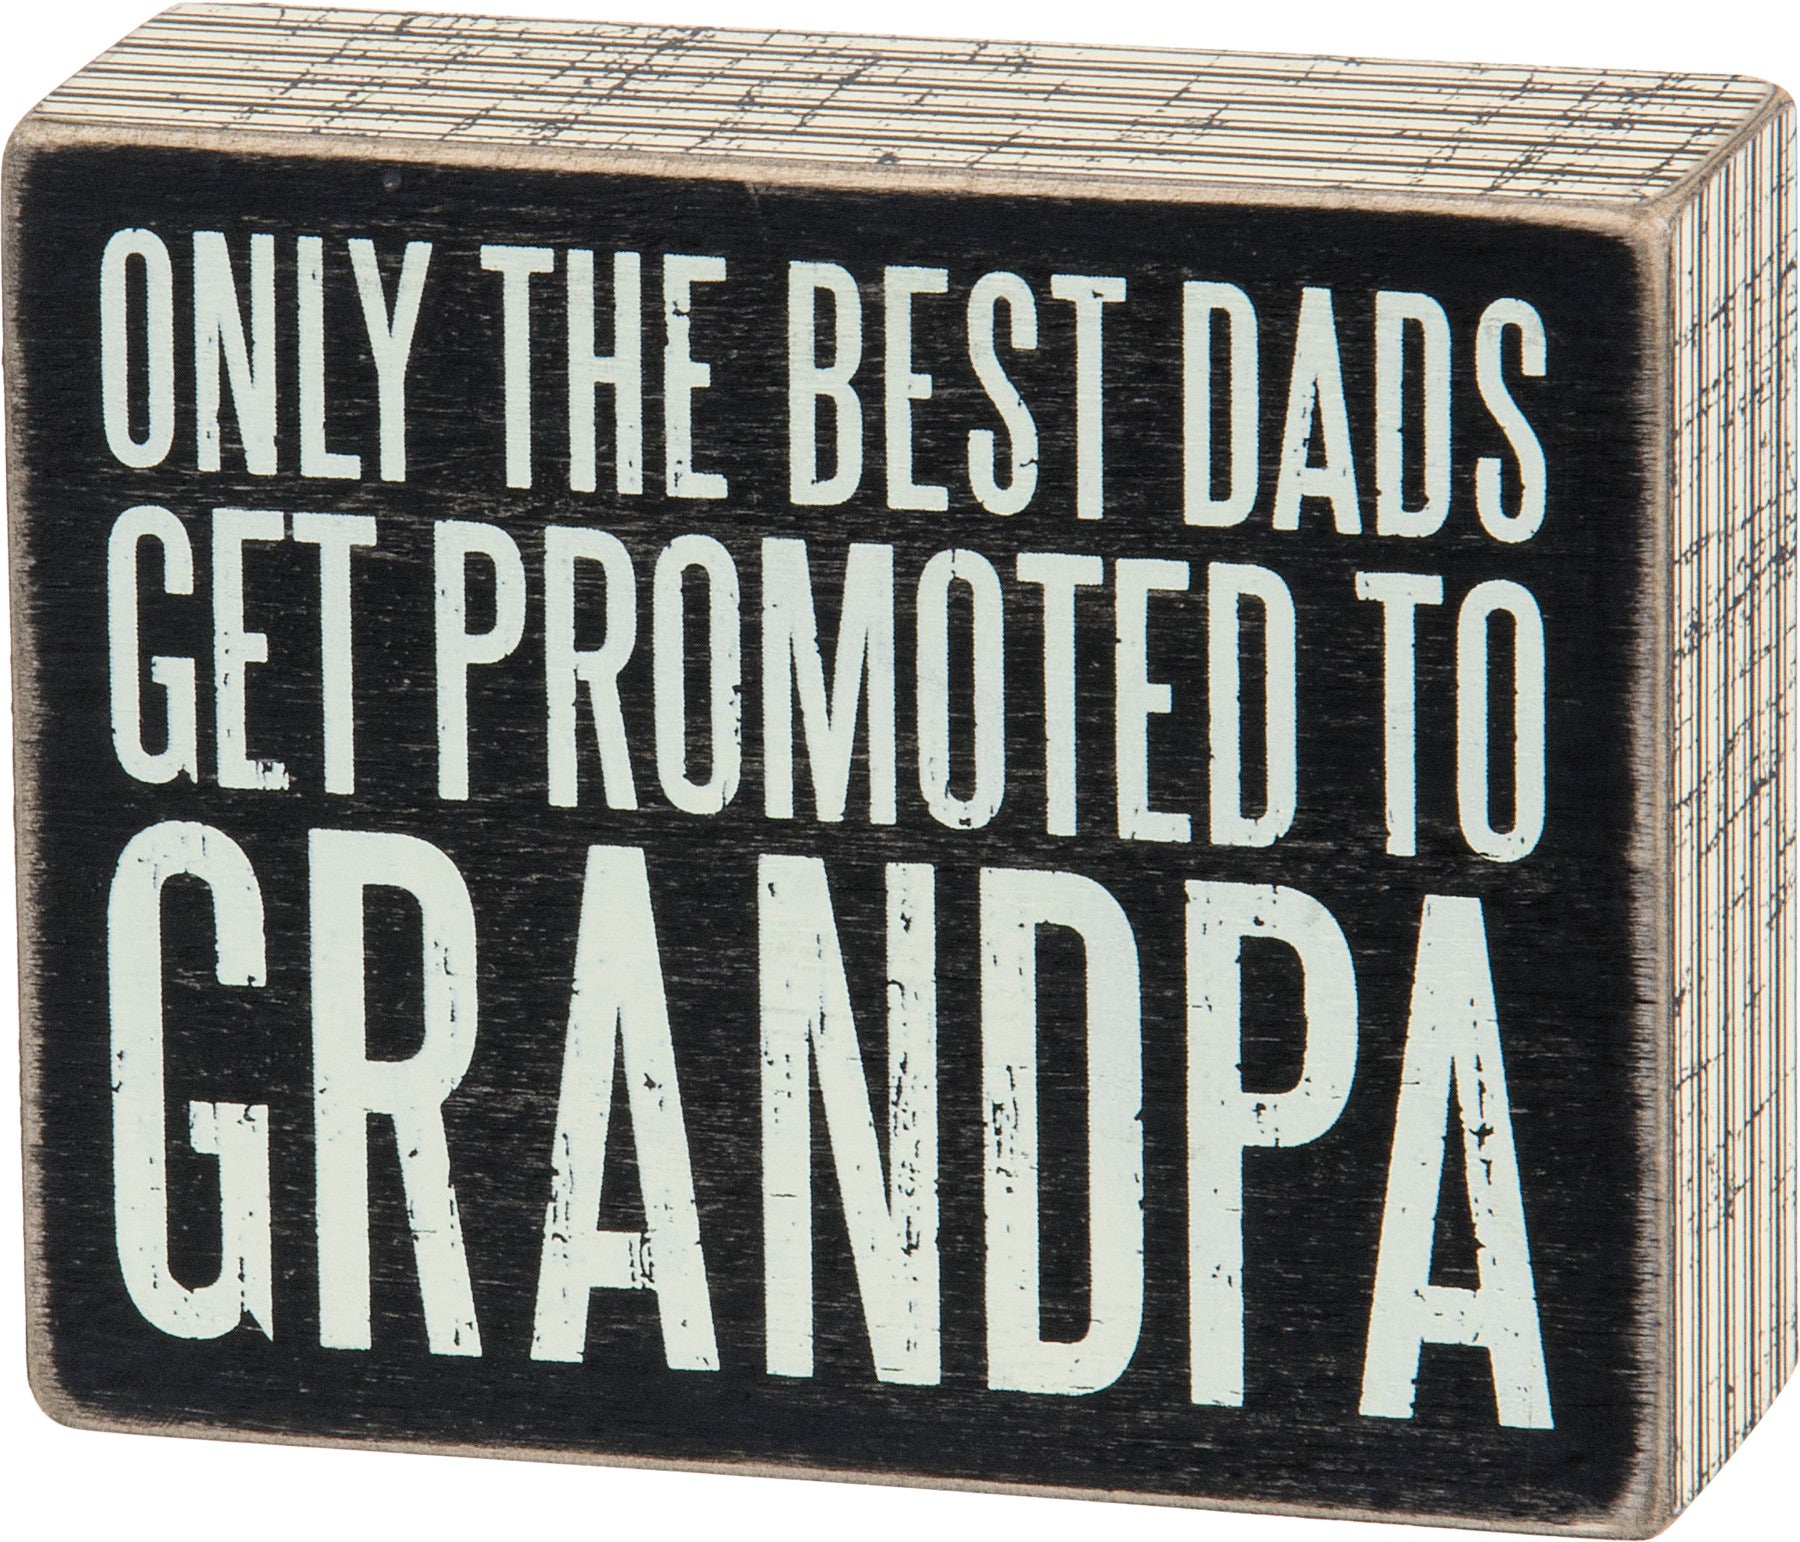 Promoted To Grandpa Box Sign